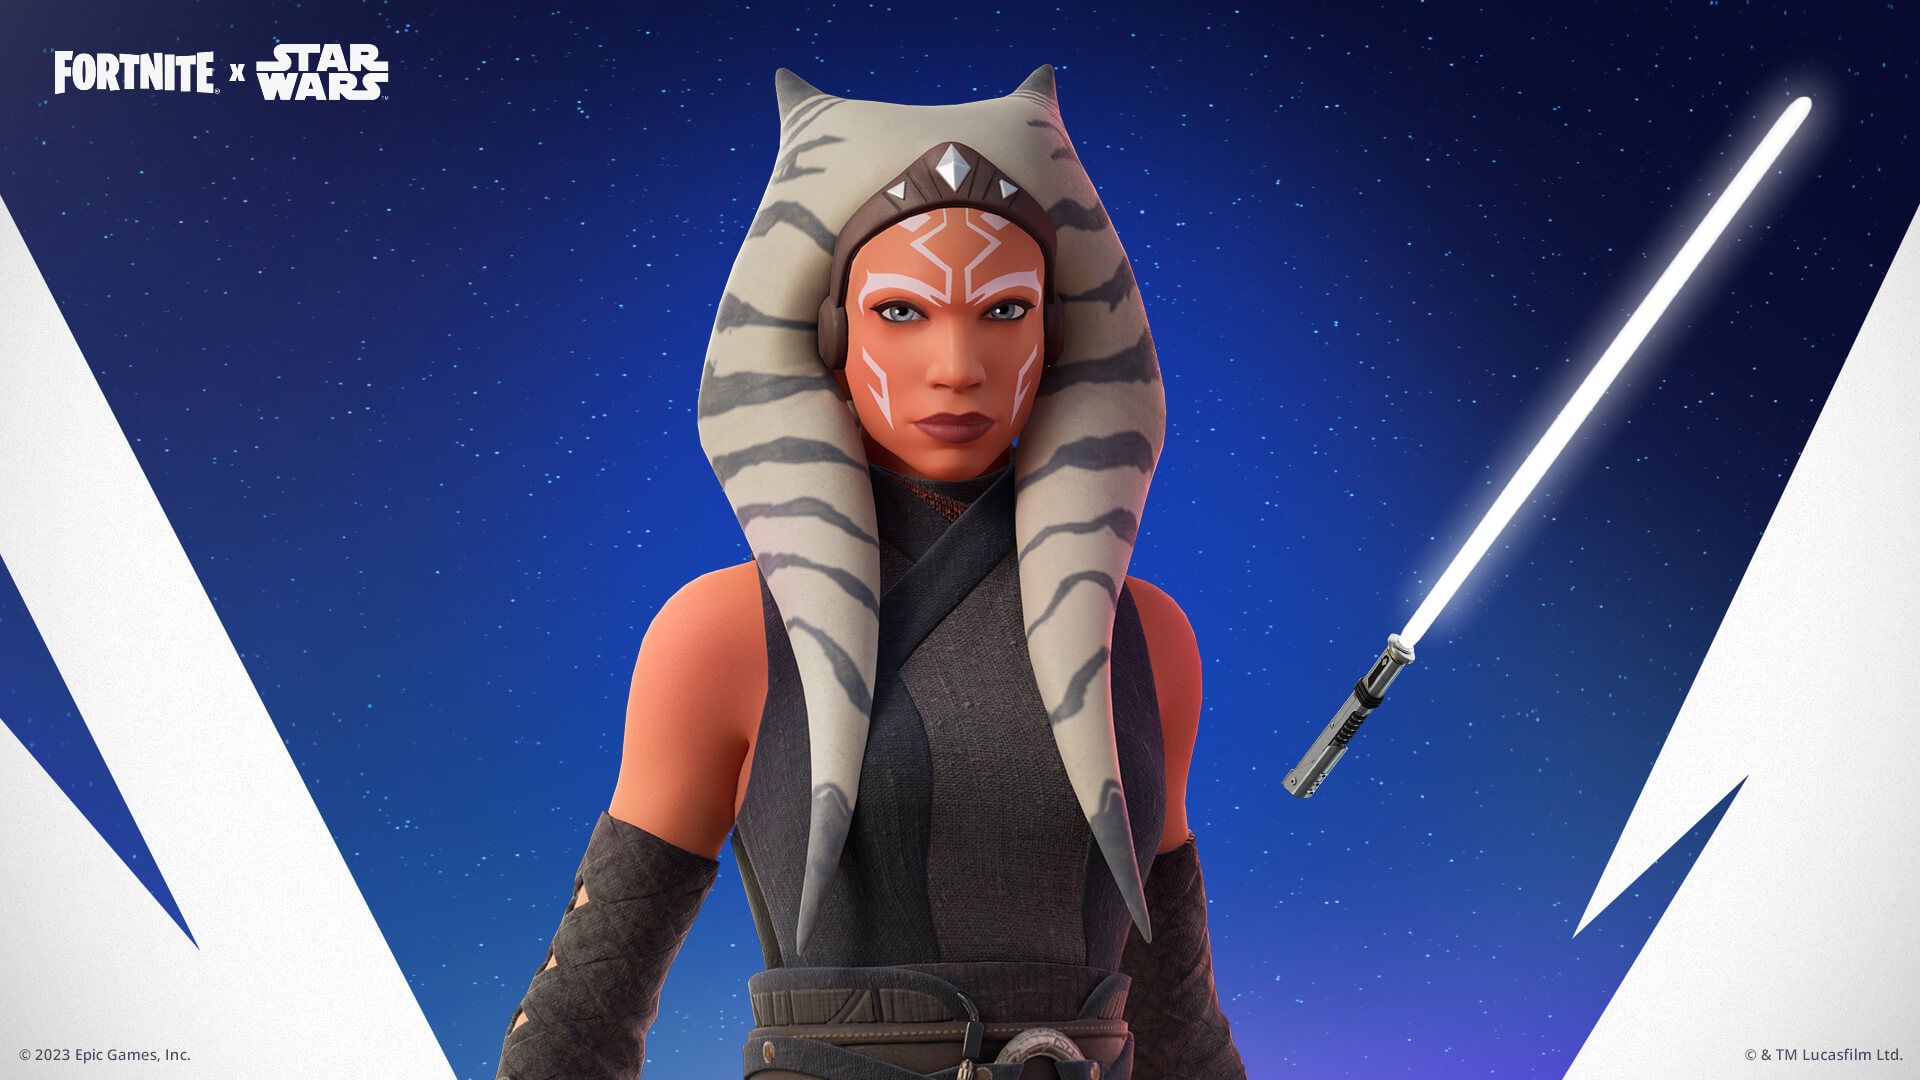 Patch Notes for Fortnite v26.20 - Jedi Training Lightsaber, New Augments and more